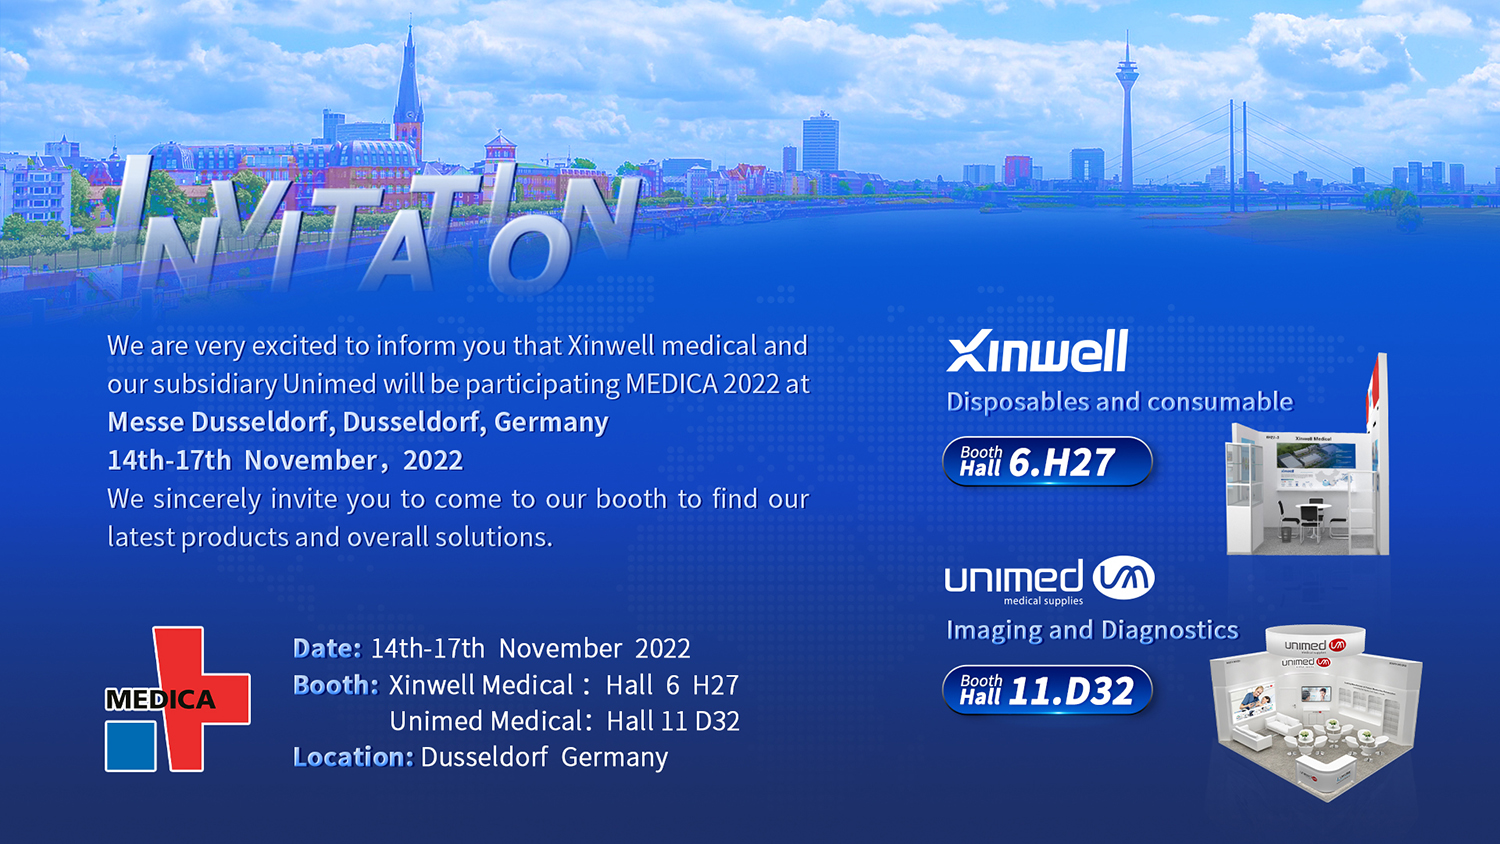 Xinwell and its subsidiary attend Medica 2022